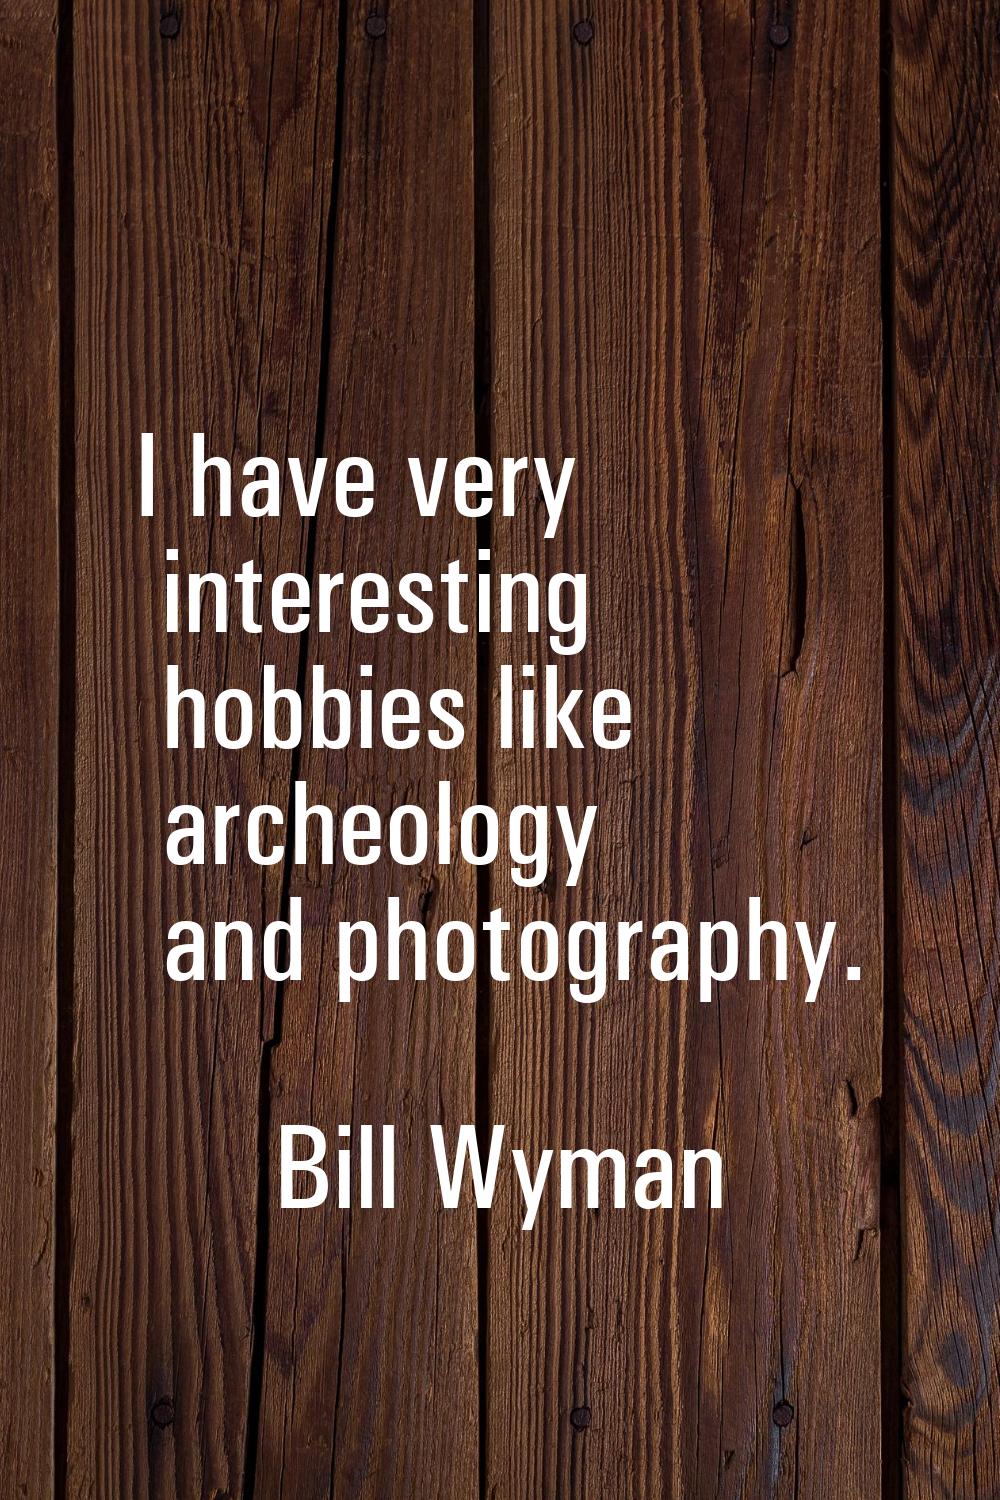 I have very interesting hobbies like archeology and photography.